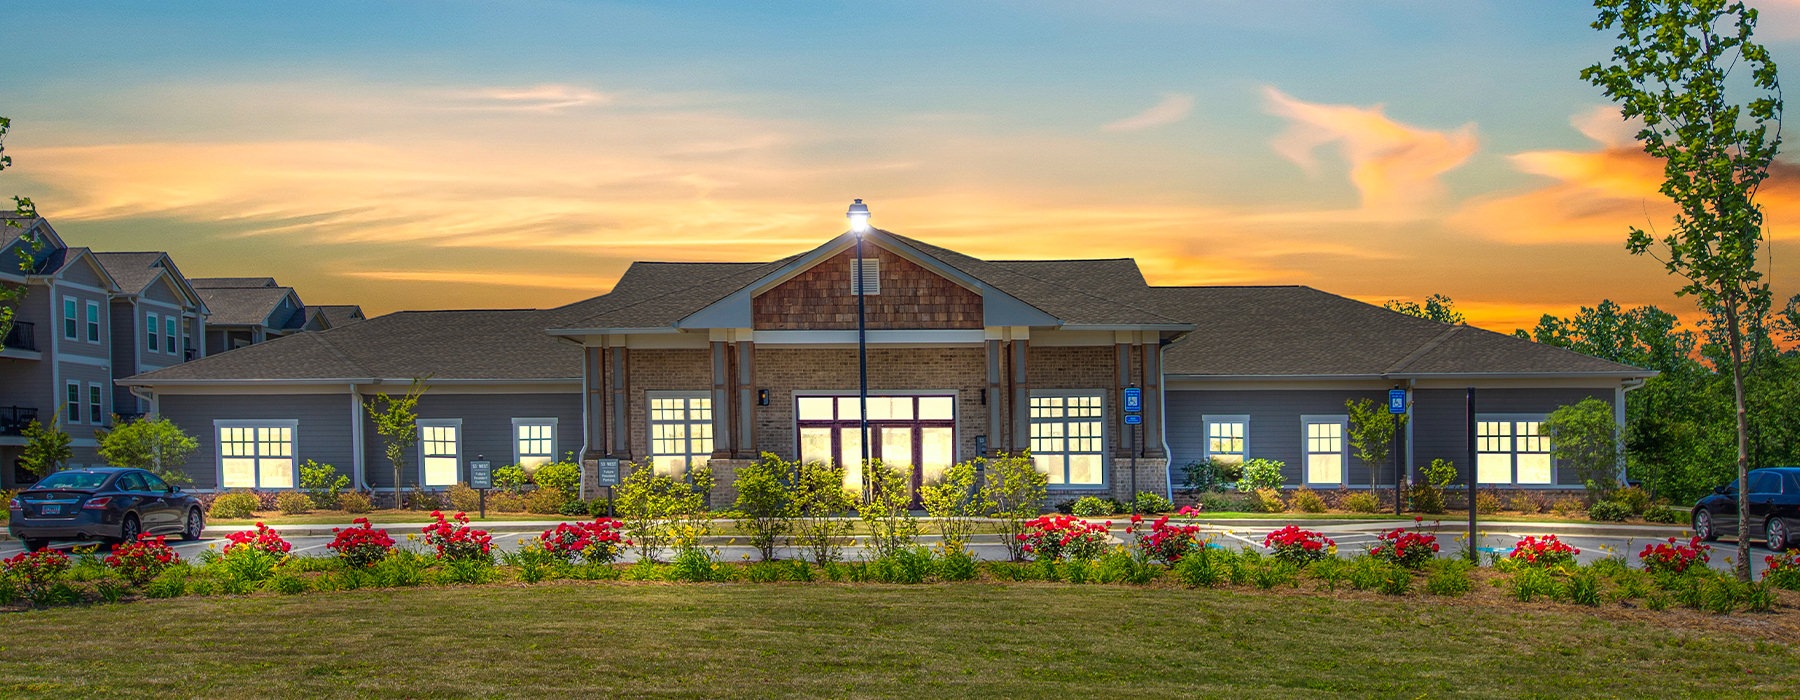 Exterior view of the leasing office during sunset